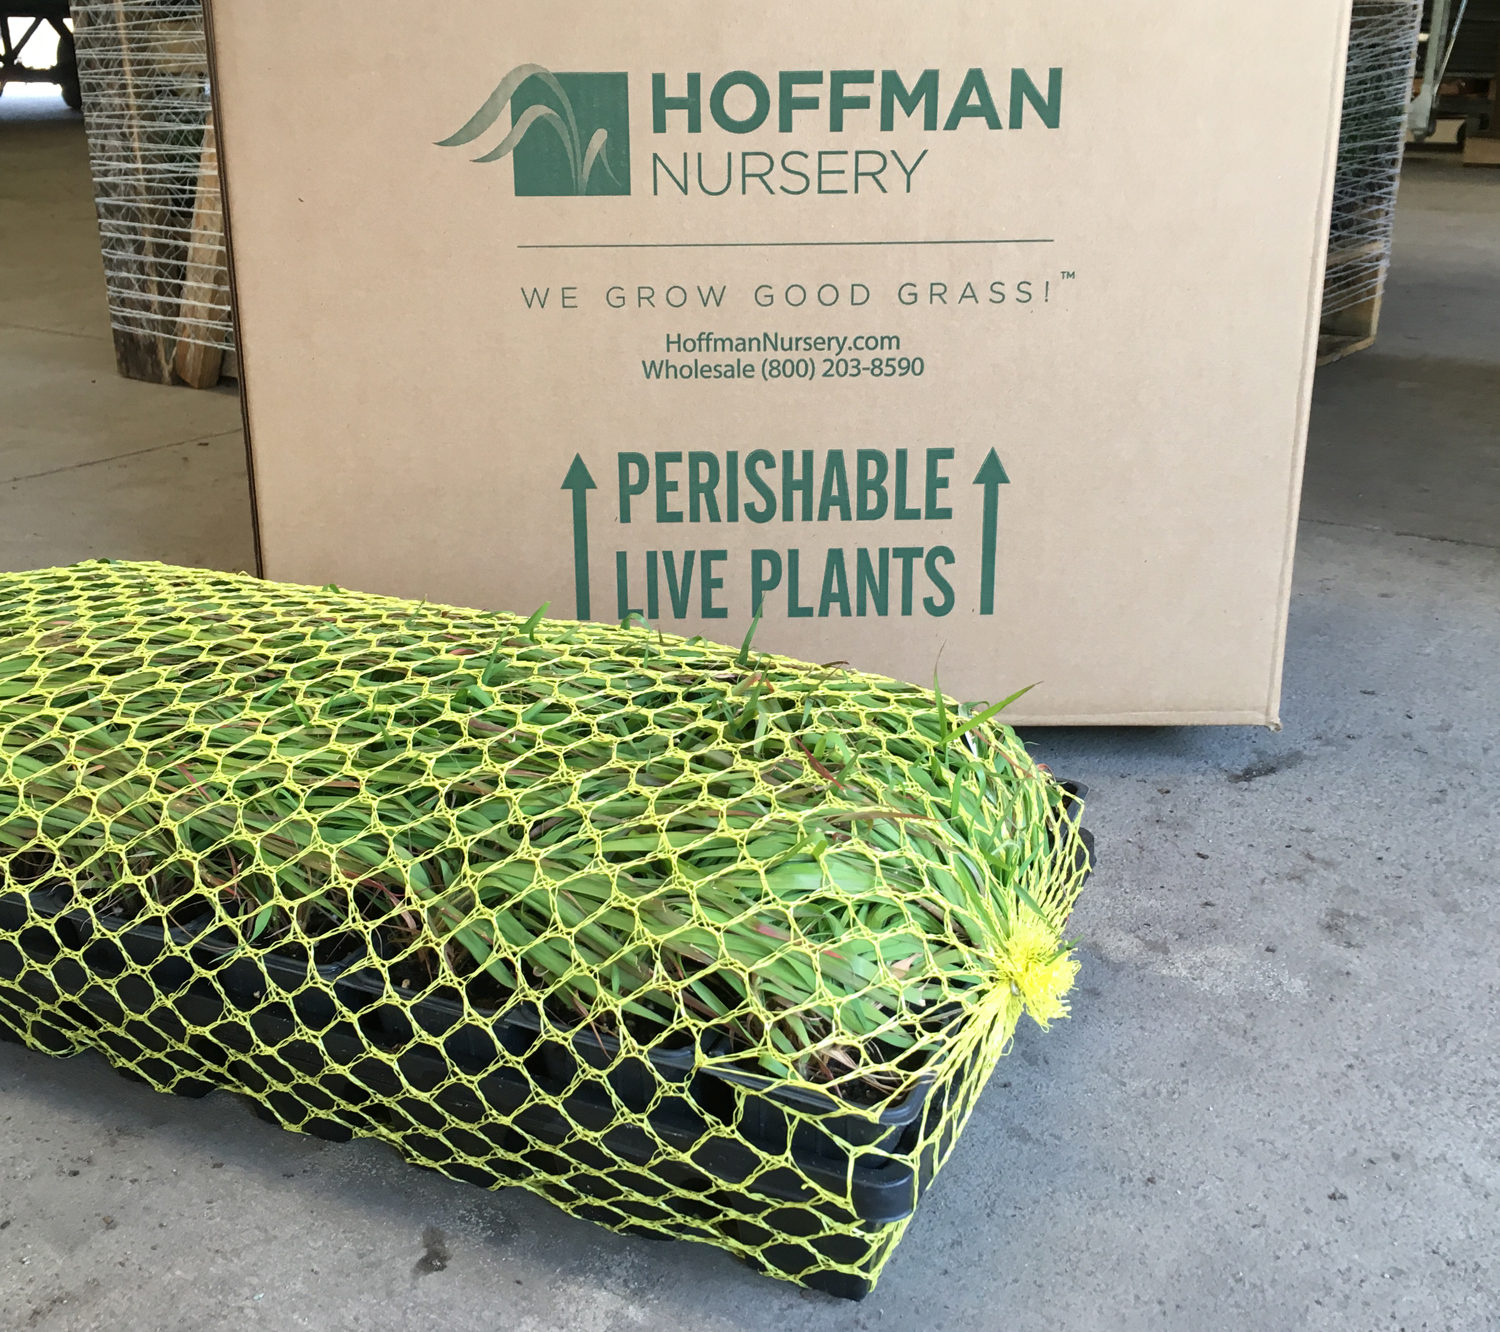 With boxed shipments, plant trays are wrapped in breathable netting to hold the plants securely.